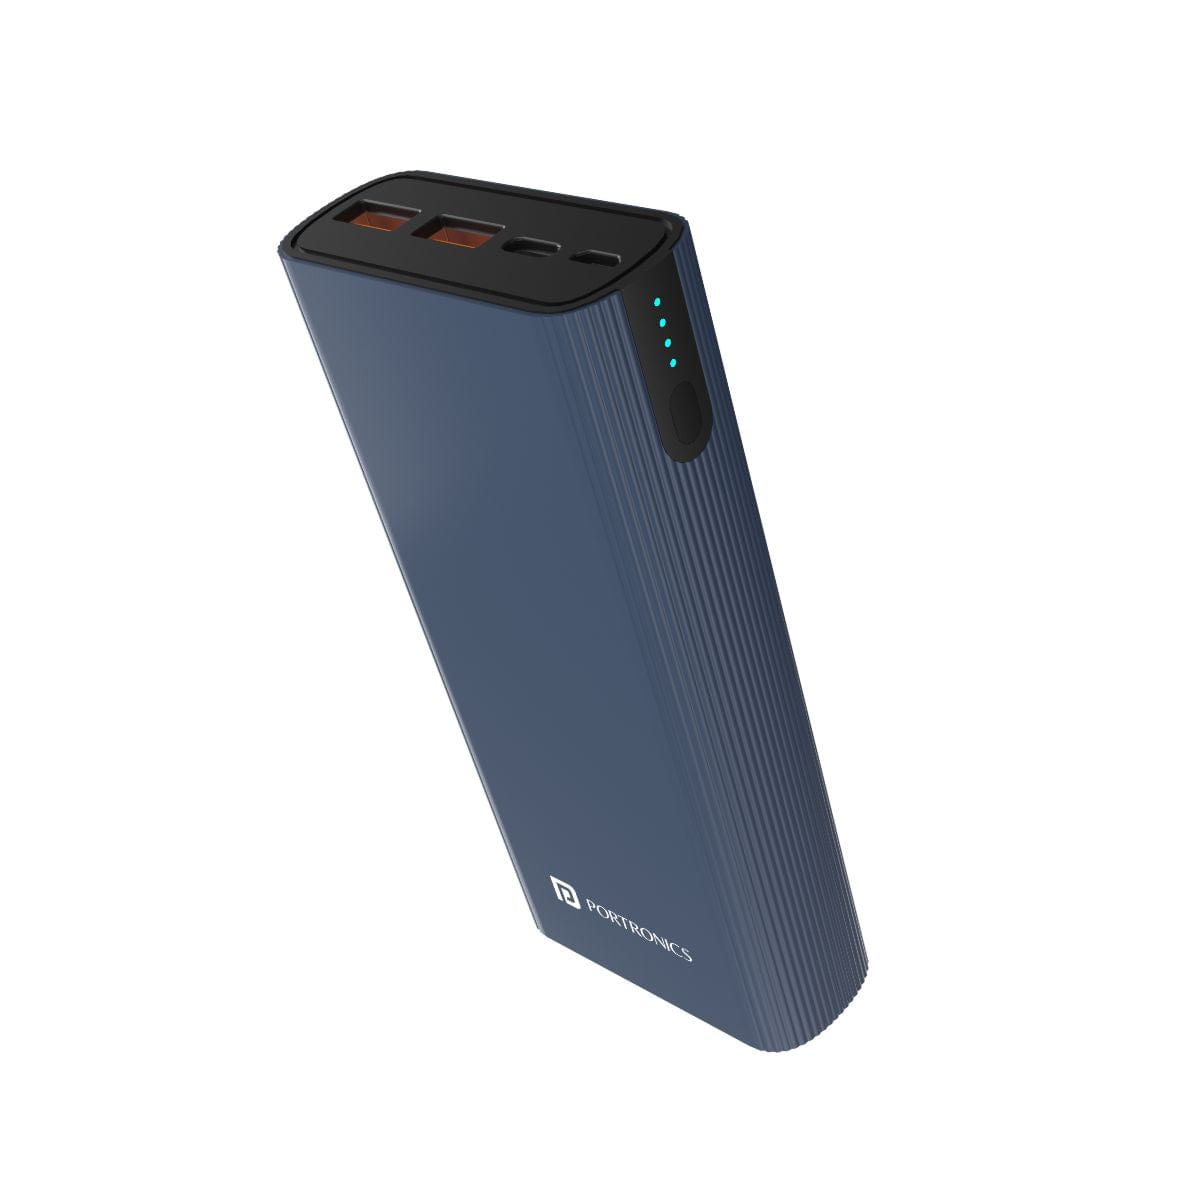 3 In 1 Portable Charger 20000 mAh